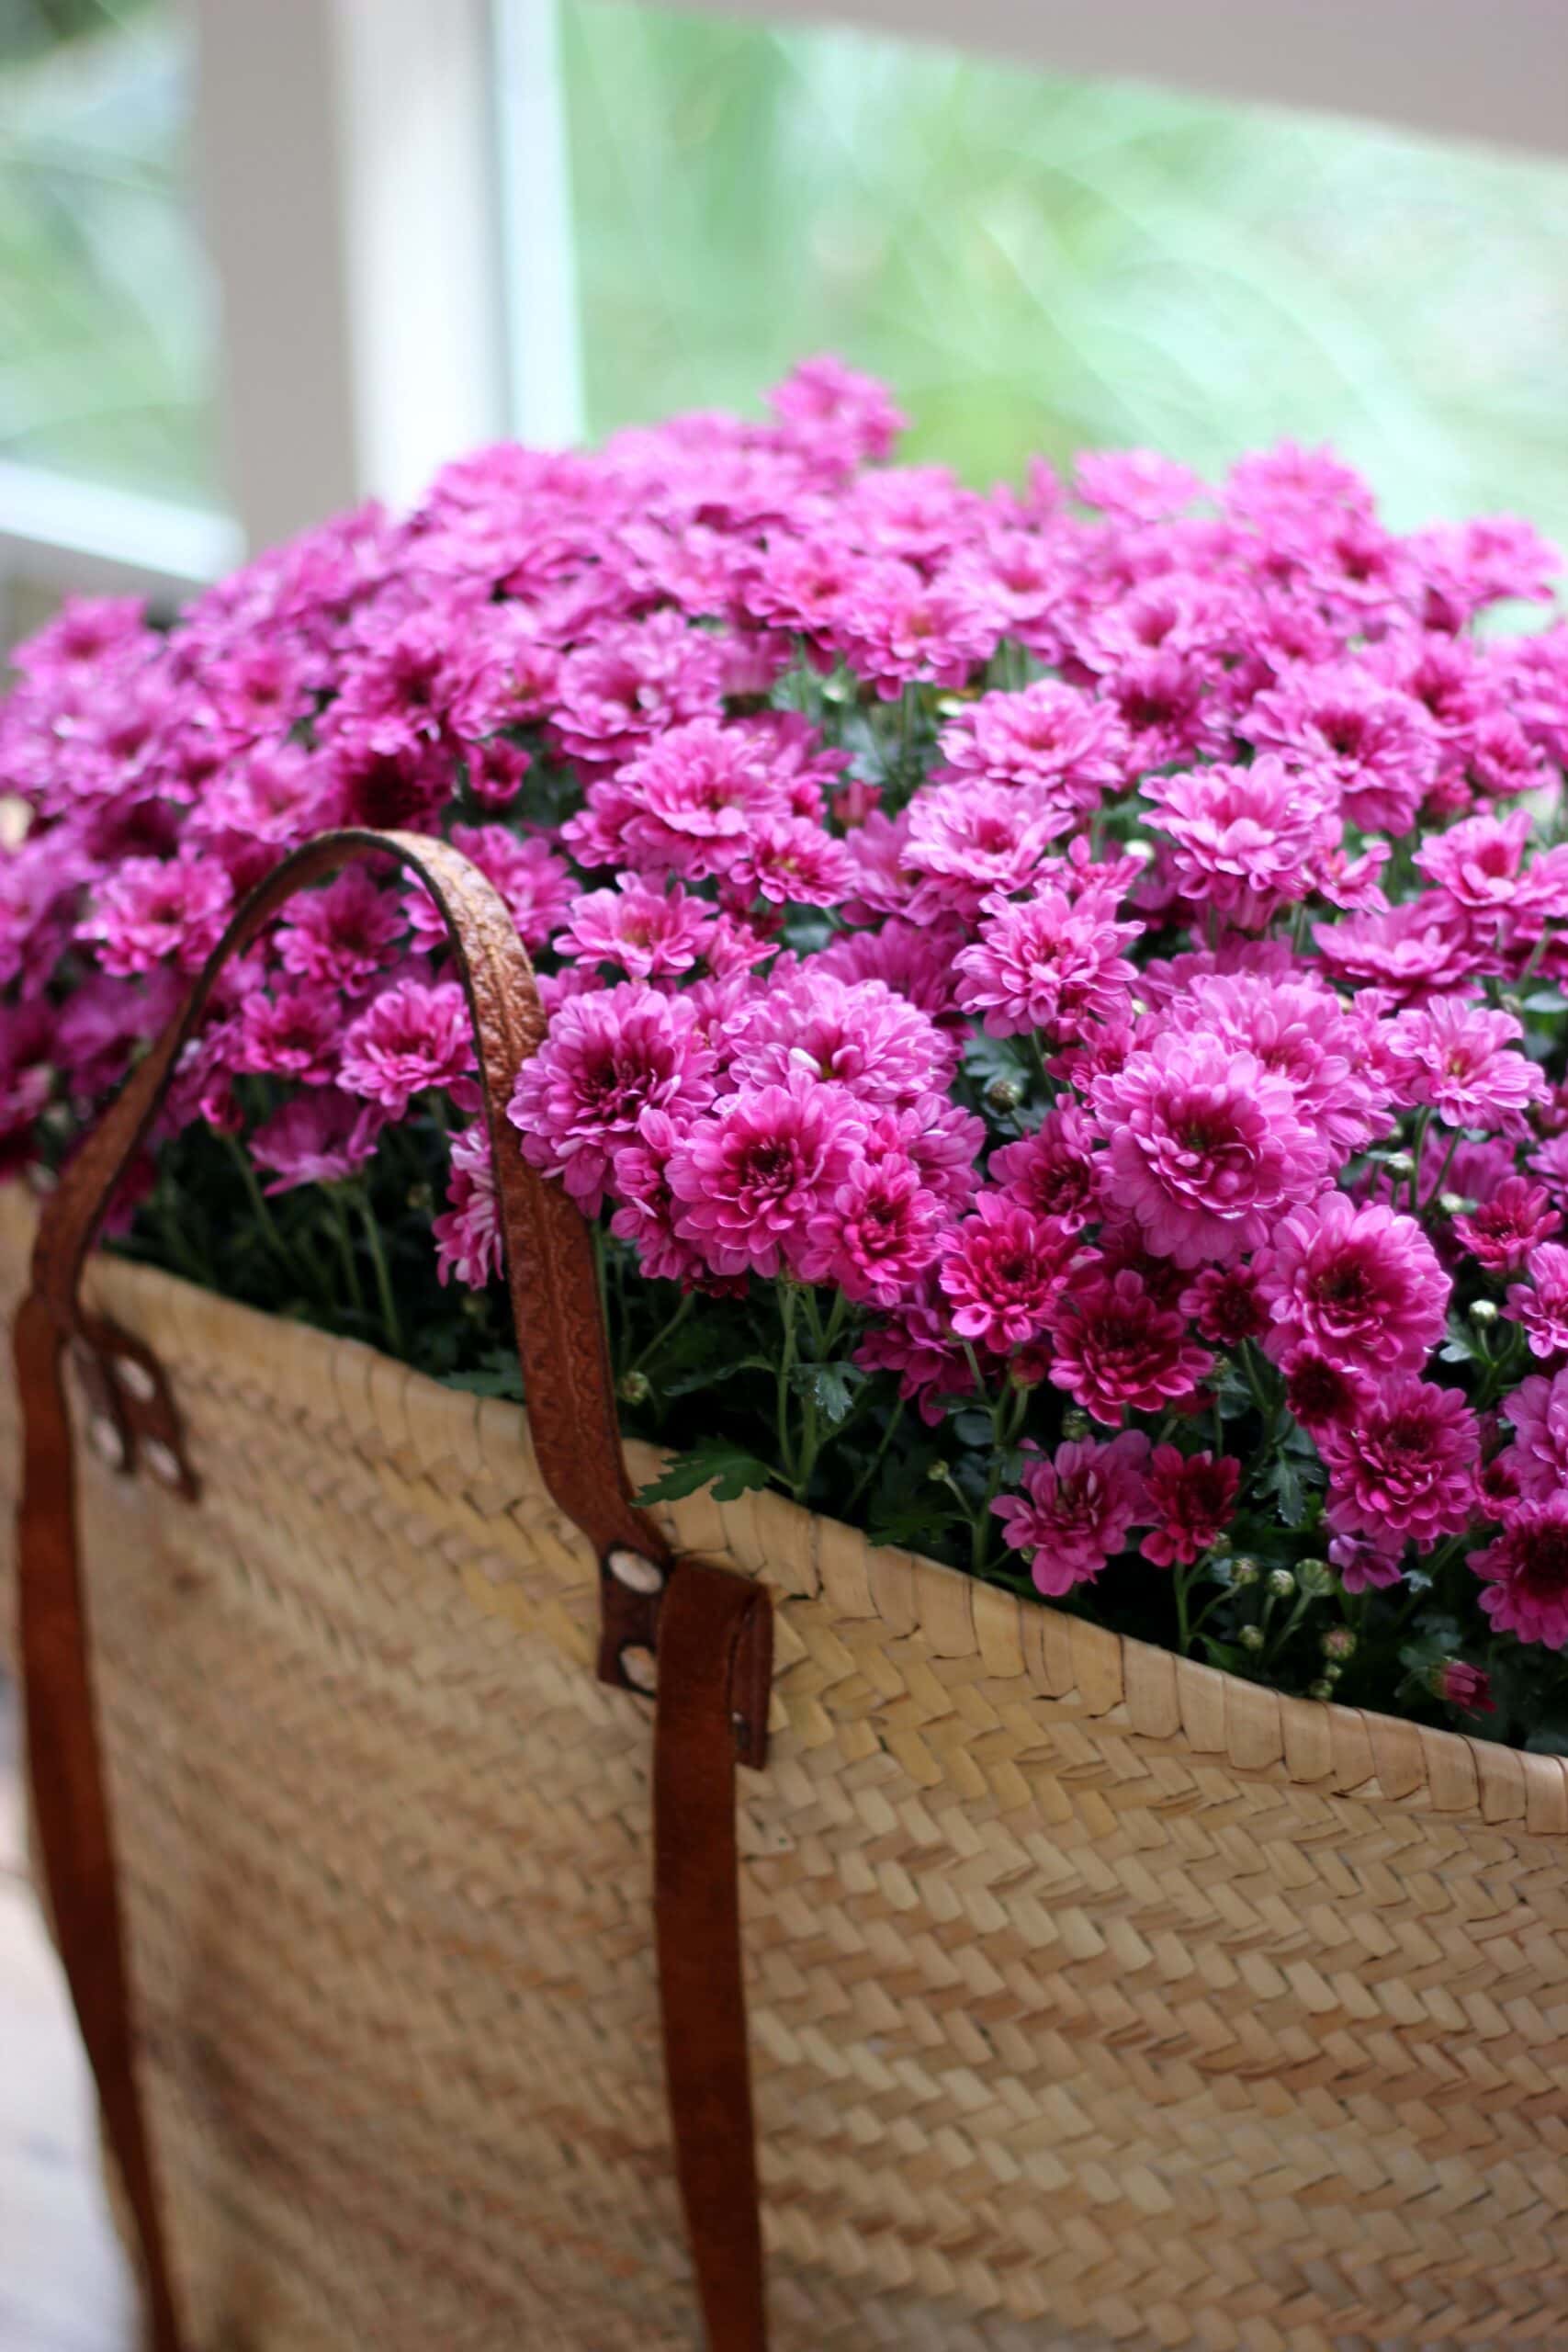 Pink chrysanthemums in a basket near the window